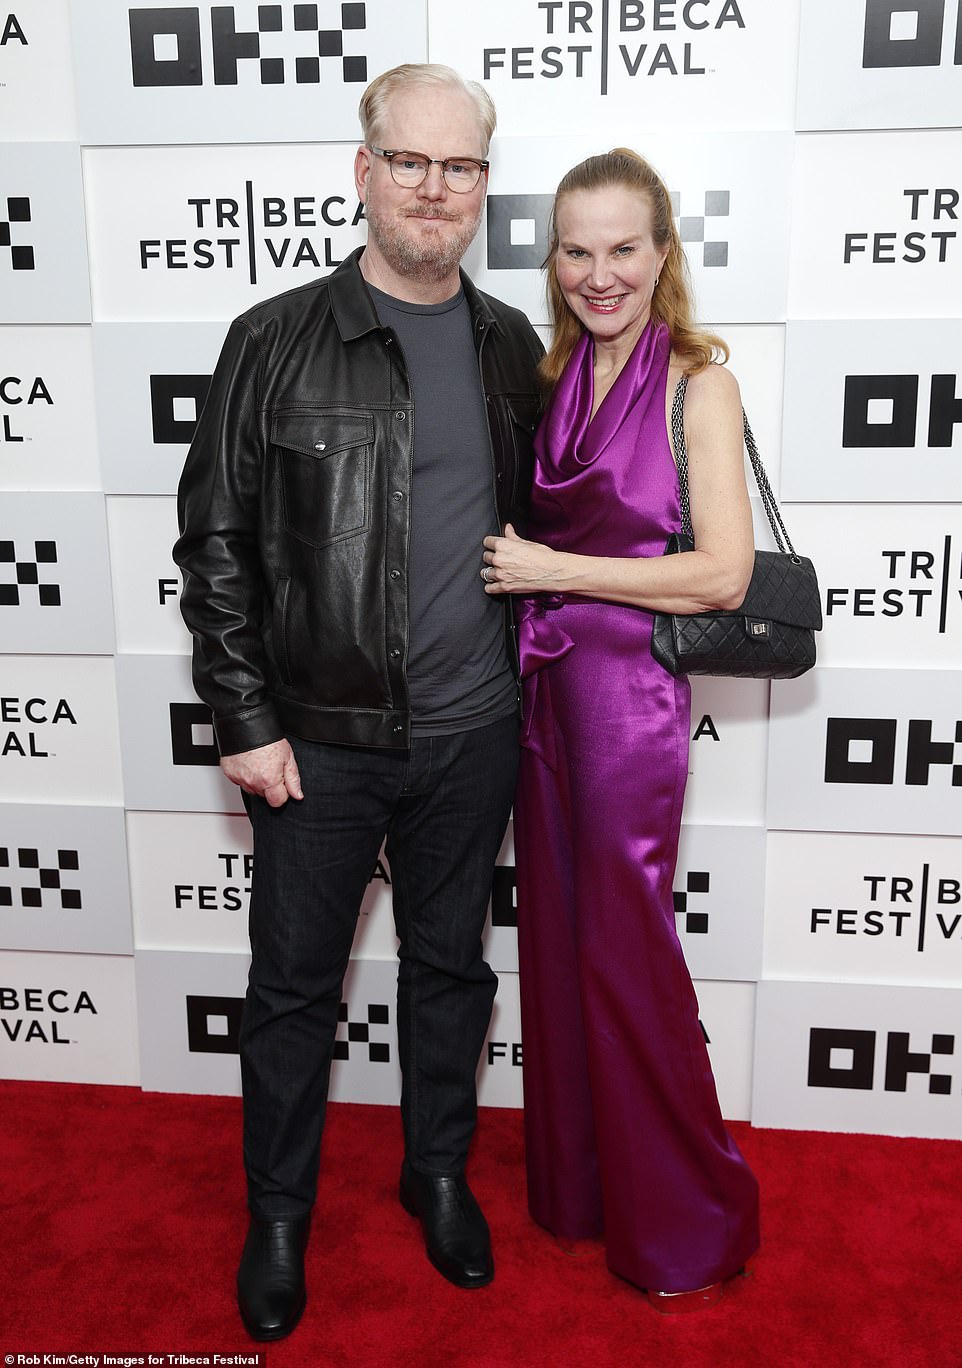 Babysitter on duty! The Walking Dead: Dead City premiere served as date night for Grammy-nominated comedian Jim Gaffigan and his wife and collaborator of 20 years, producer-writer Jeannie Noth